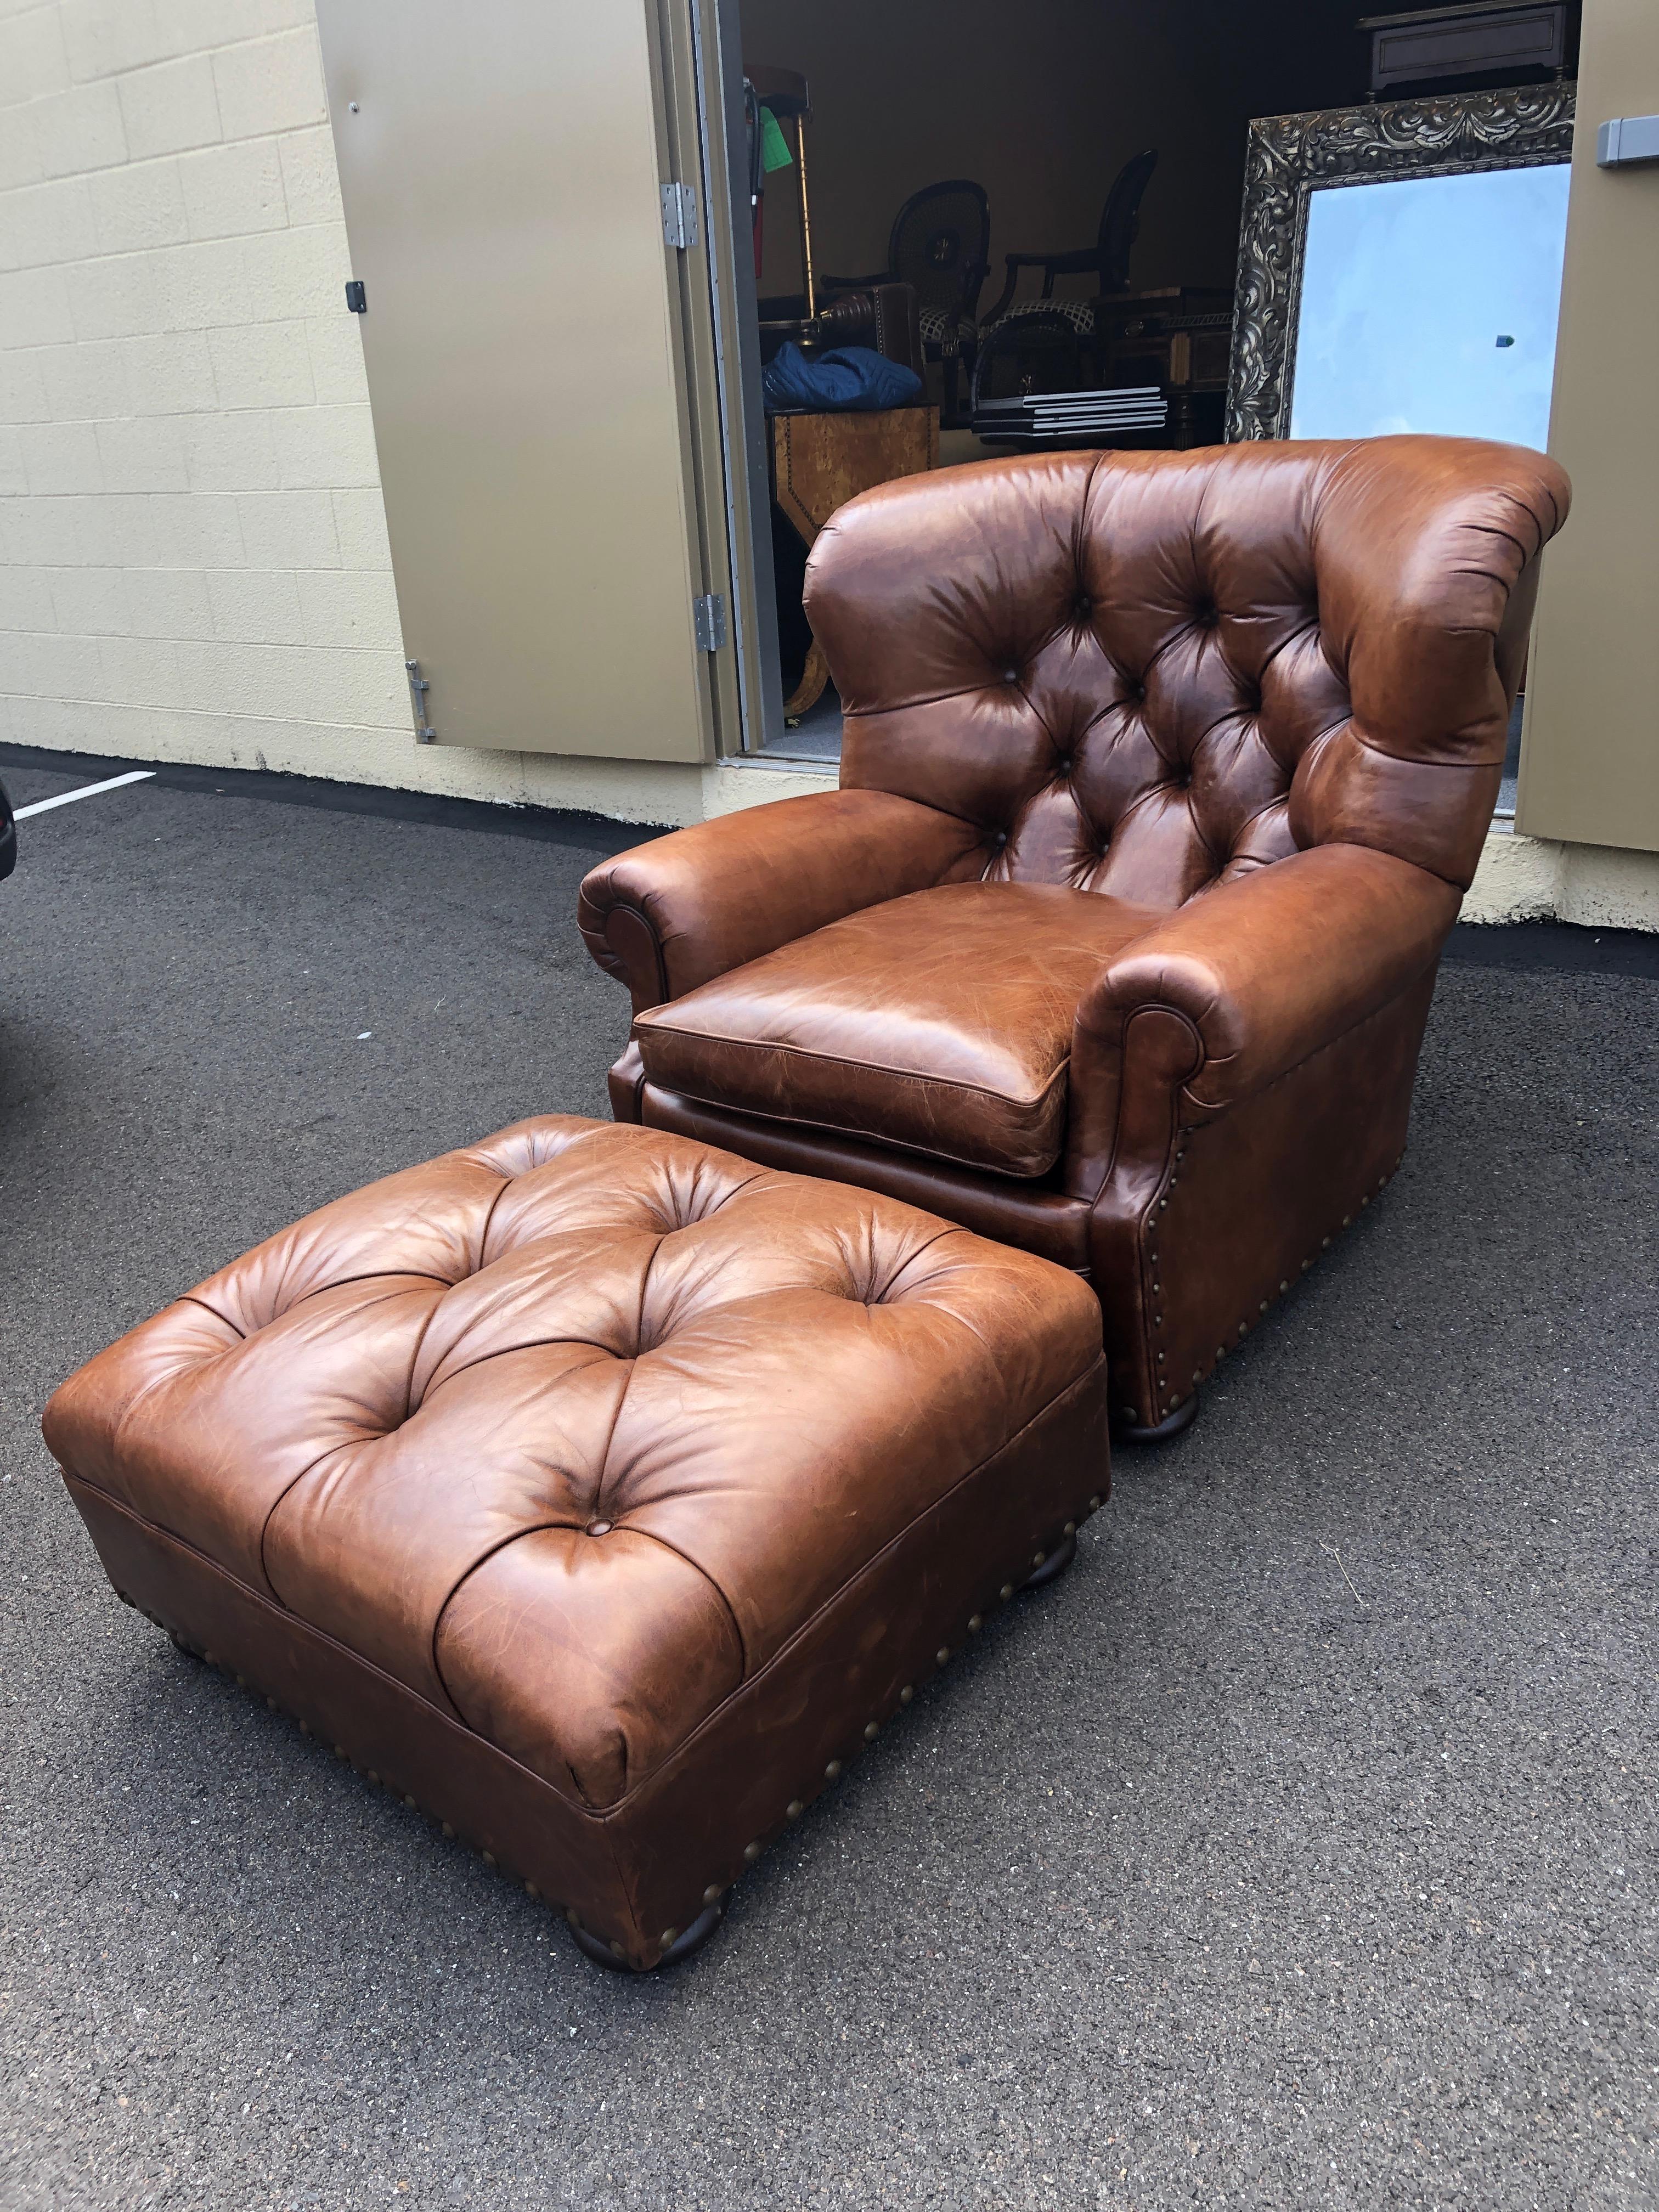 Classic and handsome tufted leather Writer's club chair and matching ottoman having mahogany bun feet and nailhead trim. Super comfy and inviting.
Measures: Chair 41 W x 41 D x 36 H
Arm height 22
Arm width 8
Between arms 21
Sitting depth